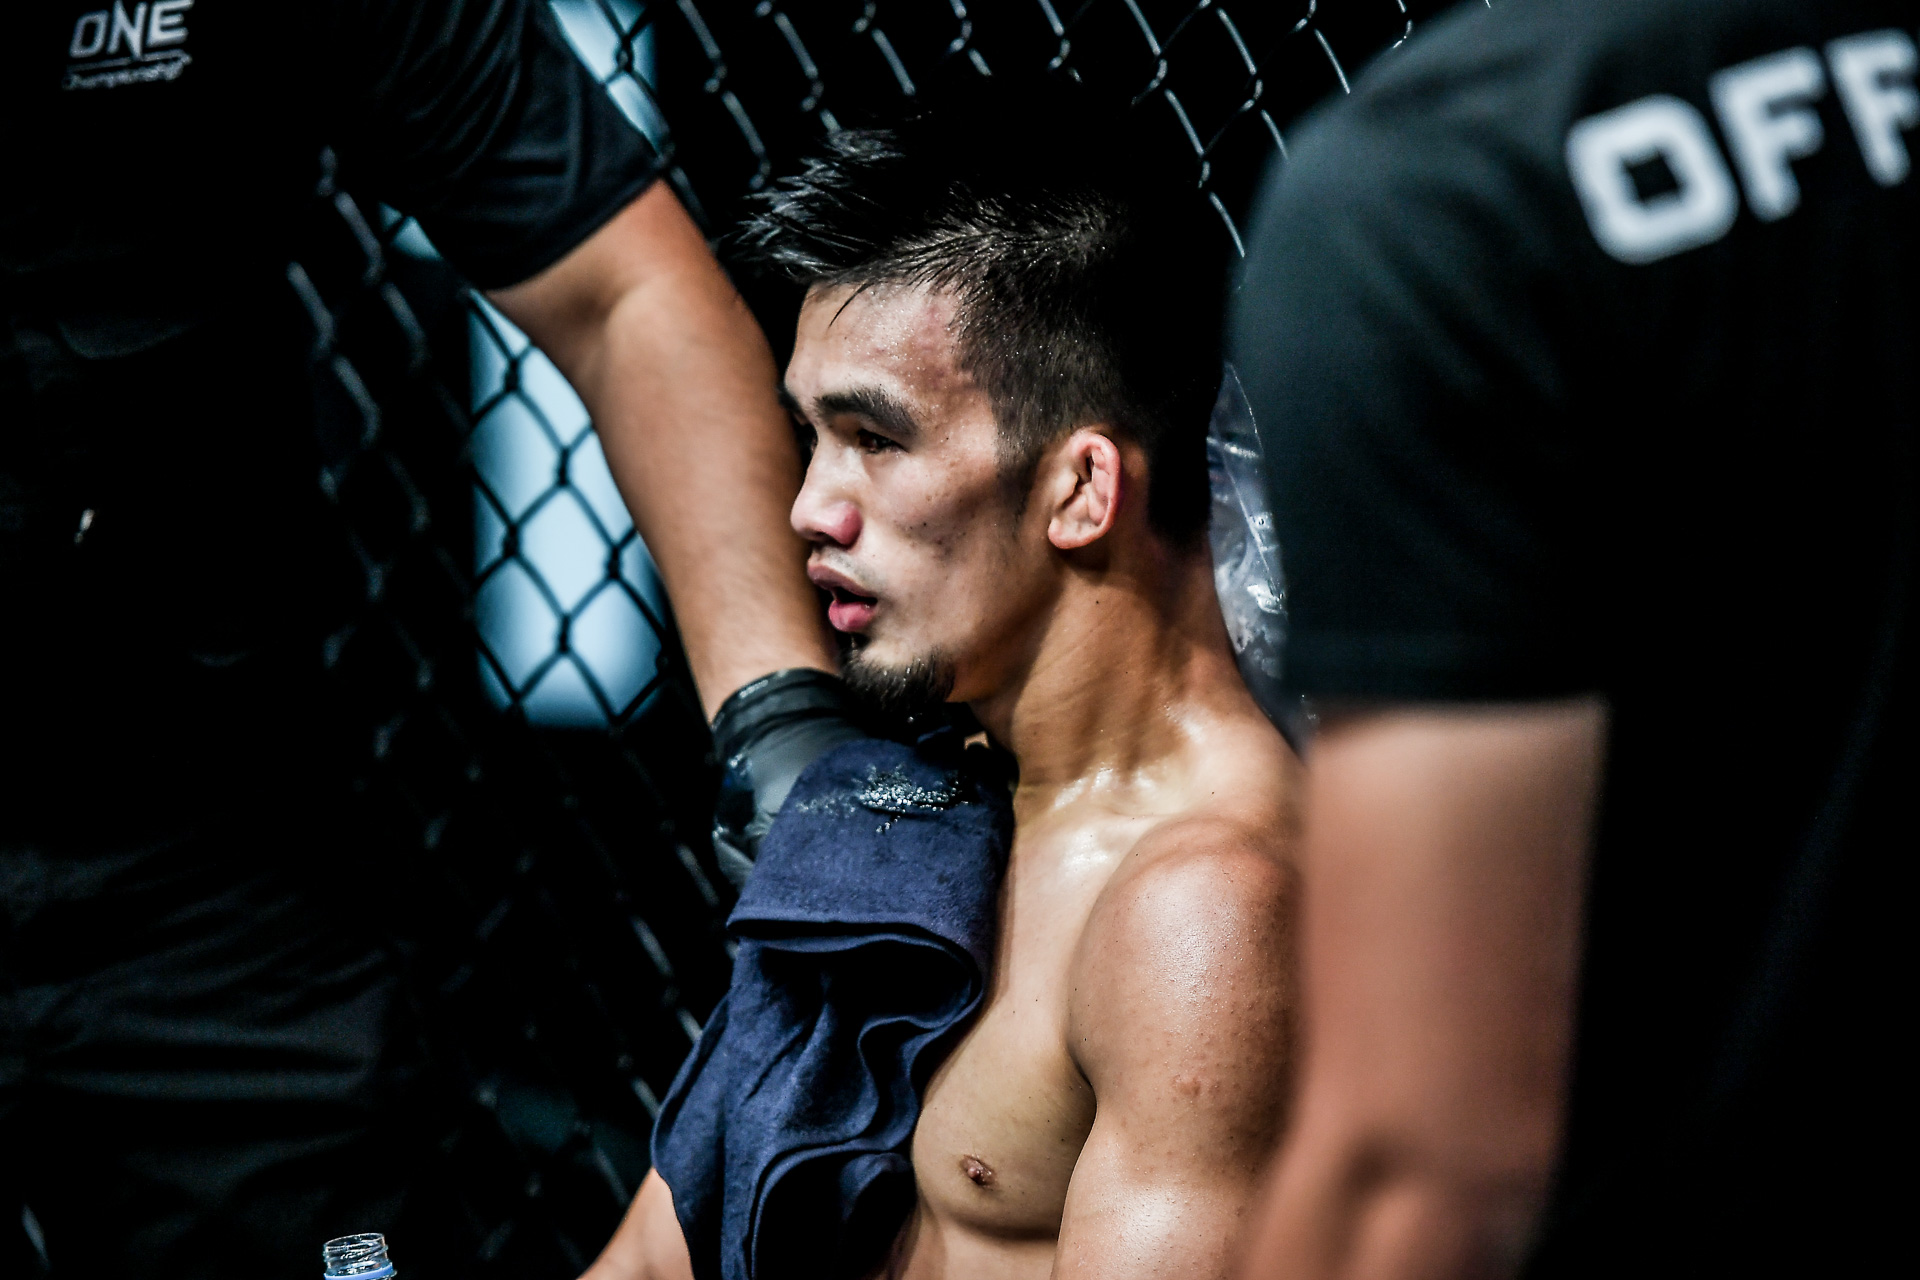 ONE-Battleground-Jeremy-pacatiw Pinoy ONE fighters pick DJ to beat Moraes in trilogy bout Mixed Martial Arts News ONE Championship  - philippine sports news